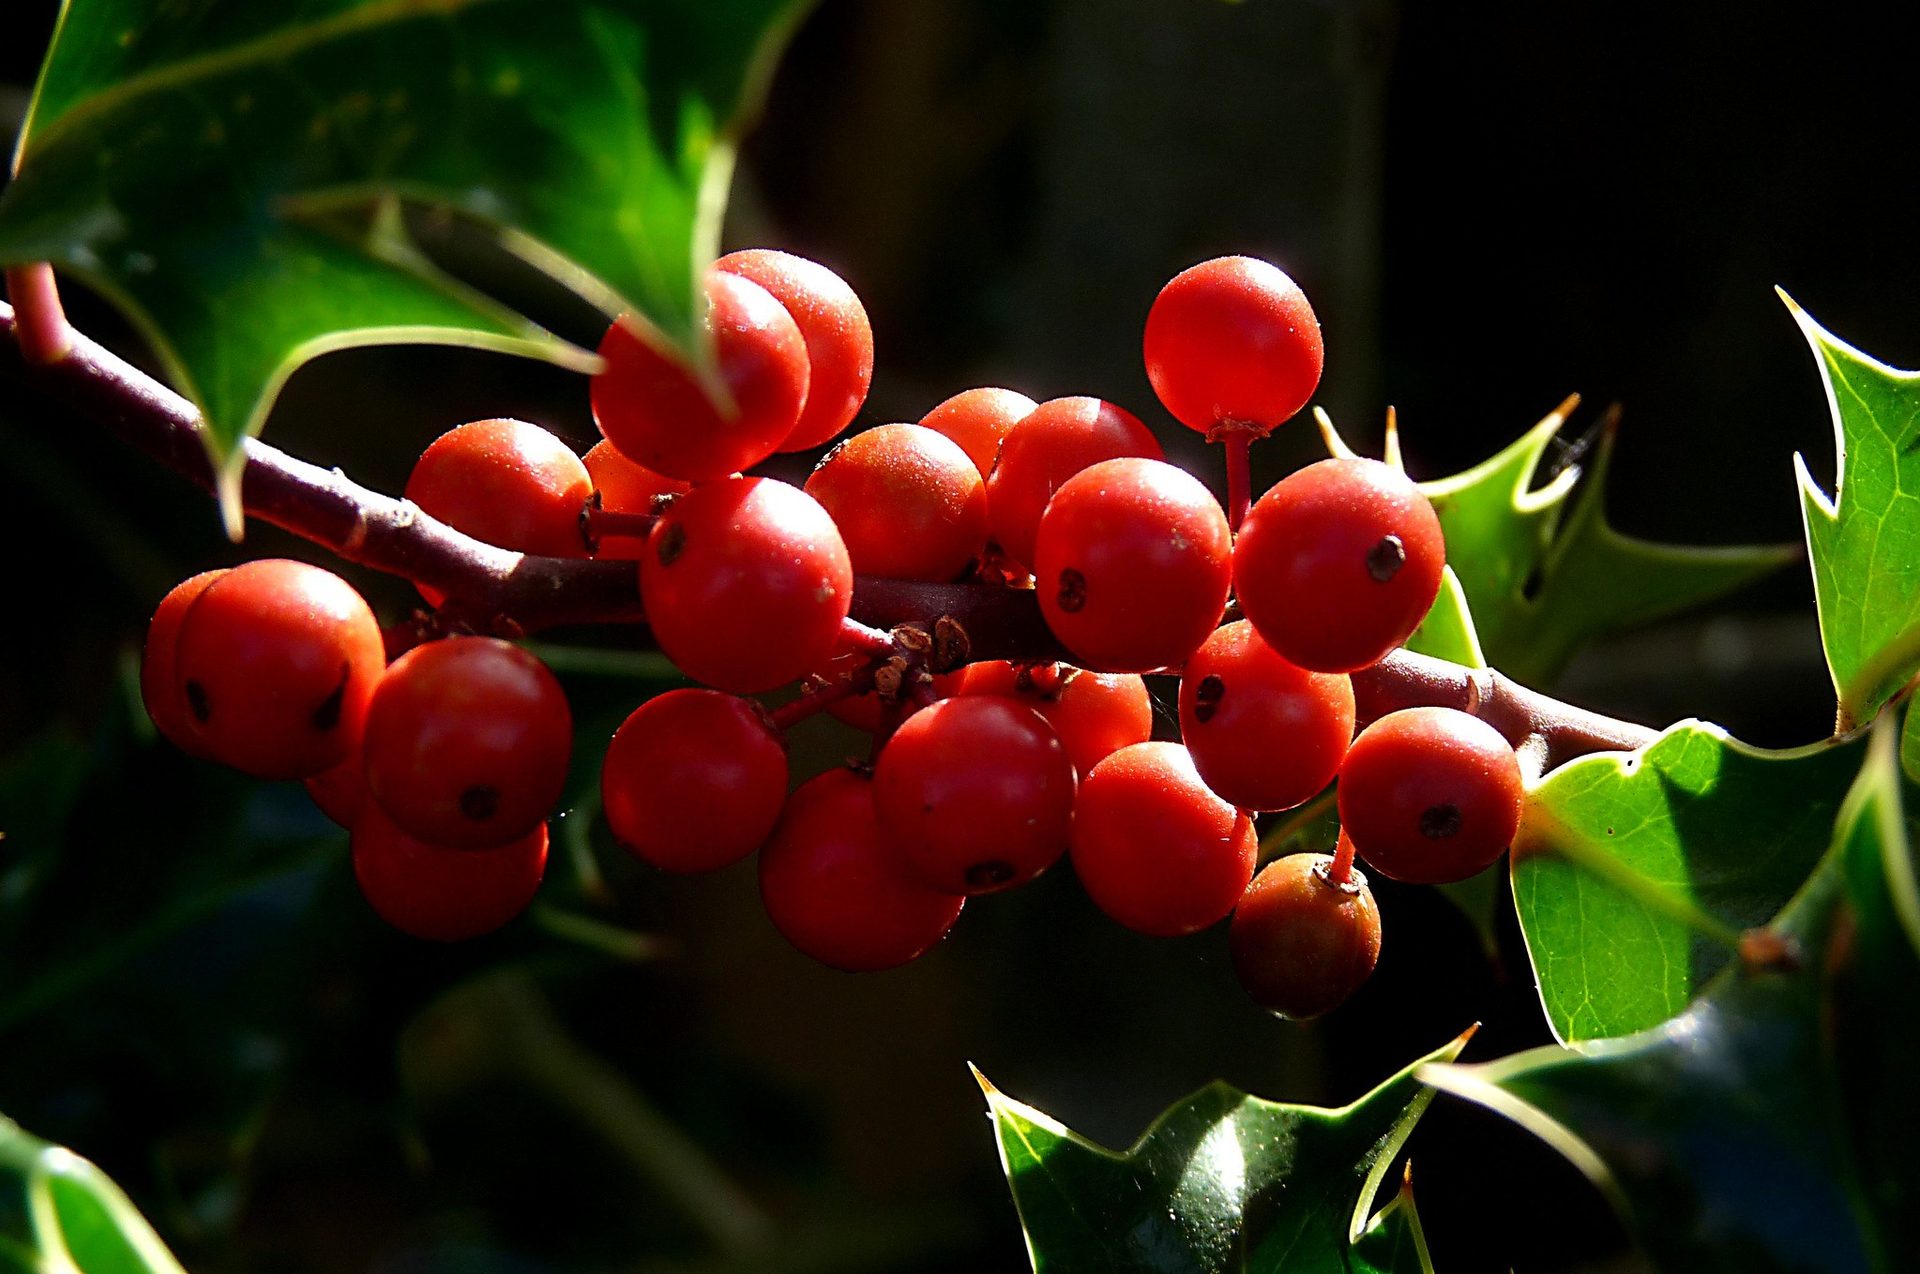 Large bunch of  bright red Holly berries on a stem